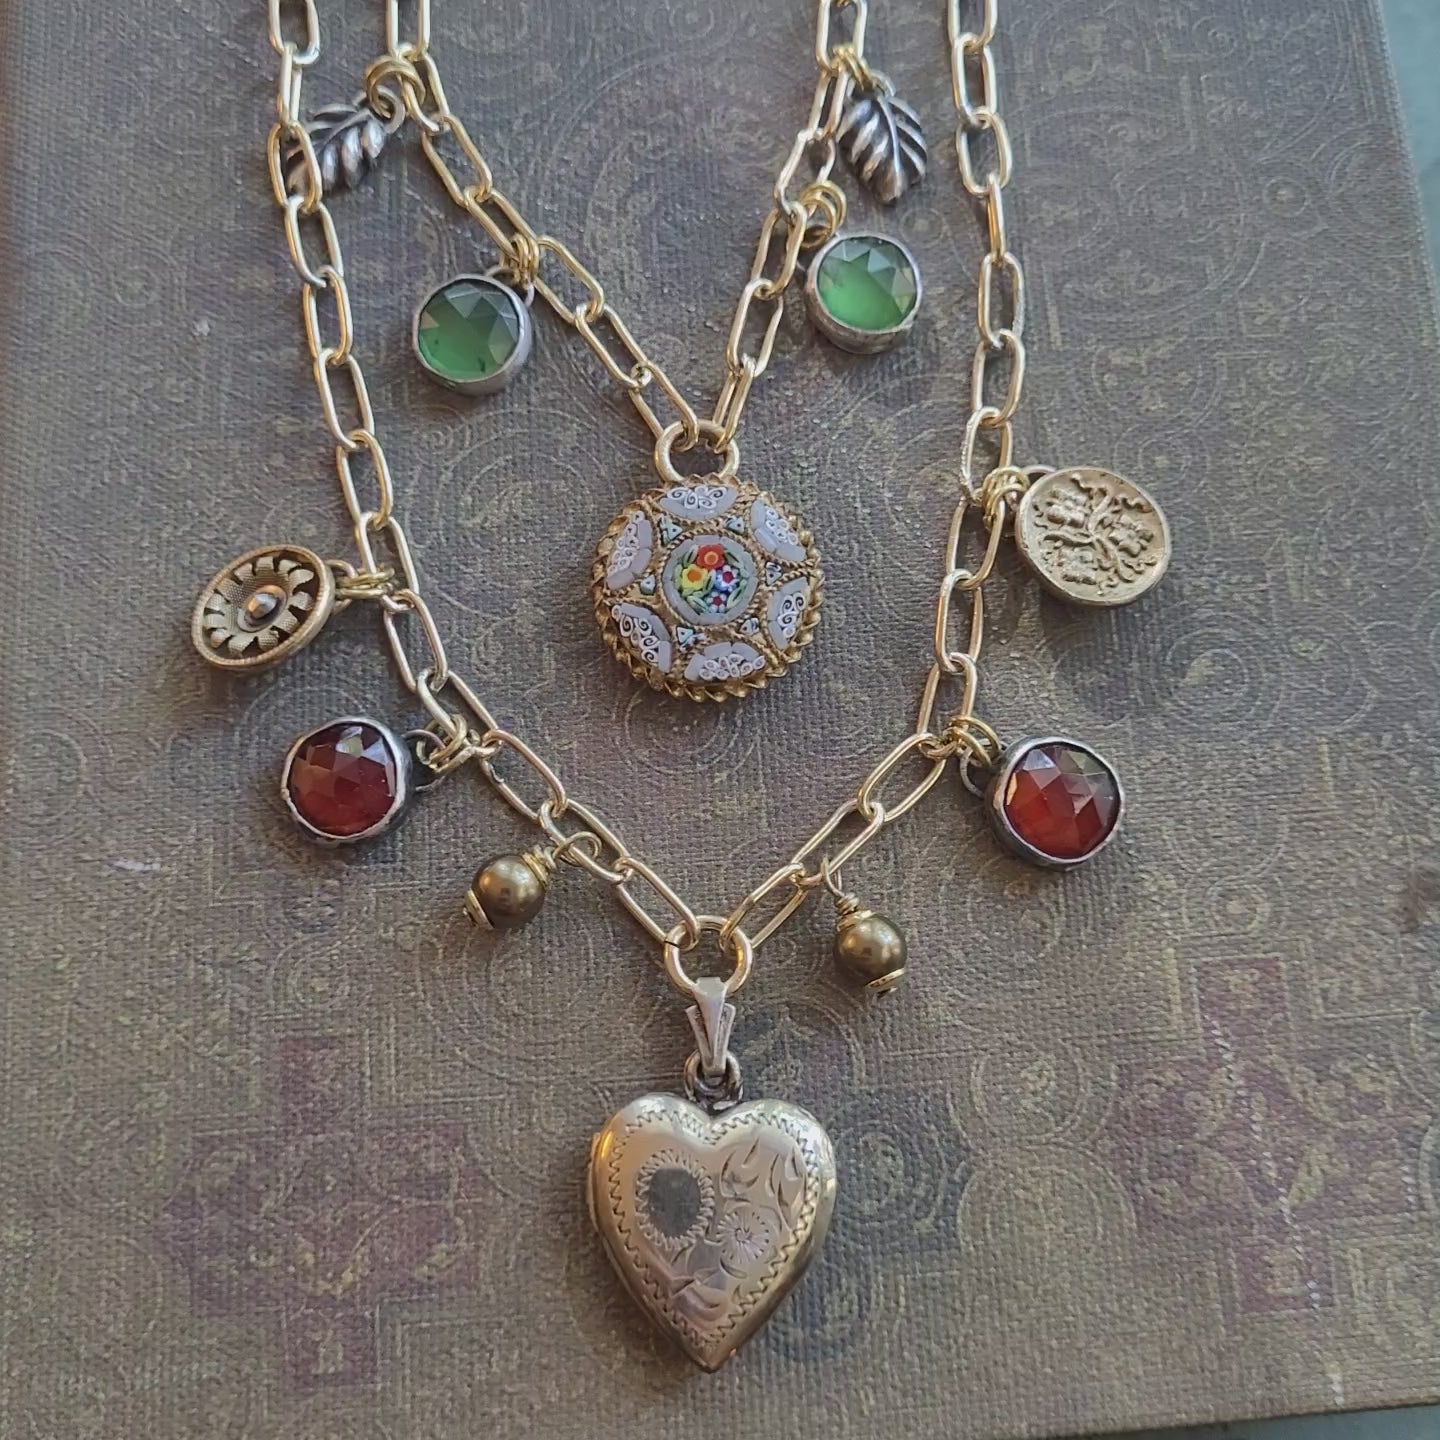 Vintage Gold Fill Heart Locket Charm Necklace with Handmade Chain  - Vintage Market Necklace No. 62